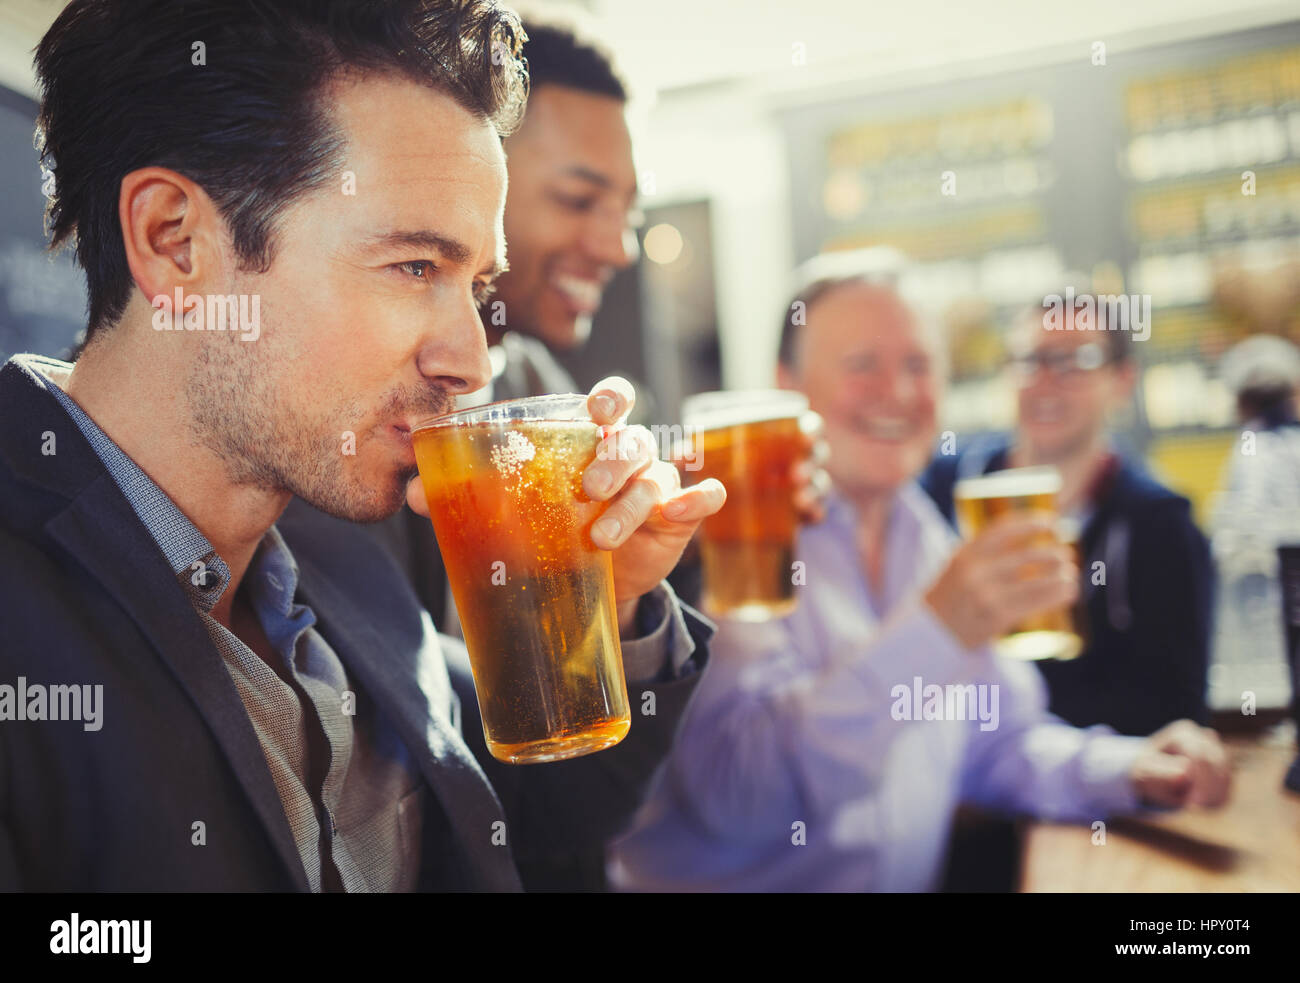 Man drinking beer with friends at bar Stock Photo